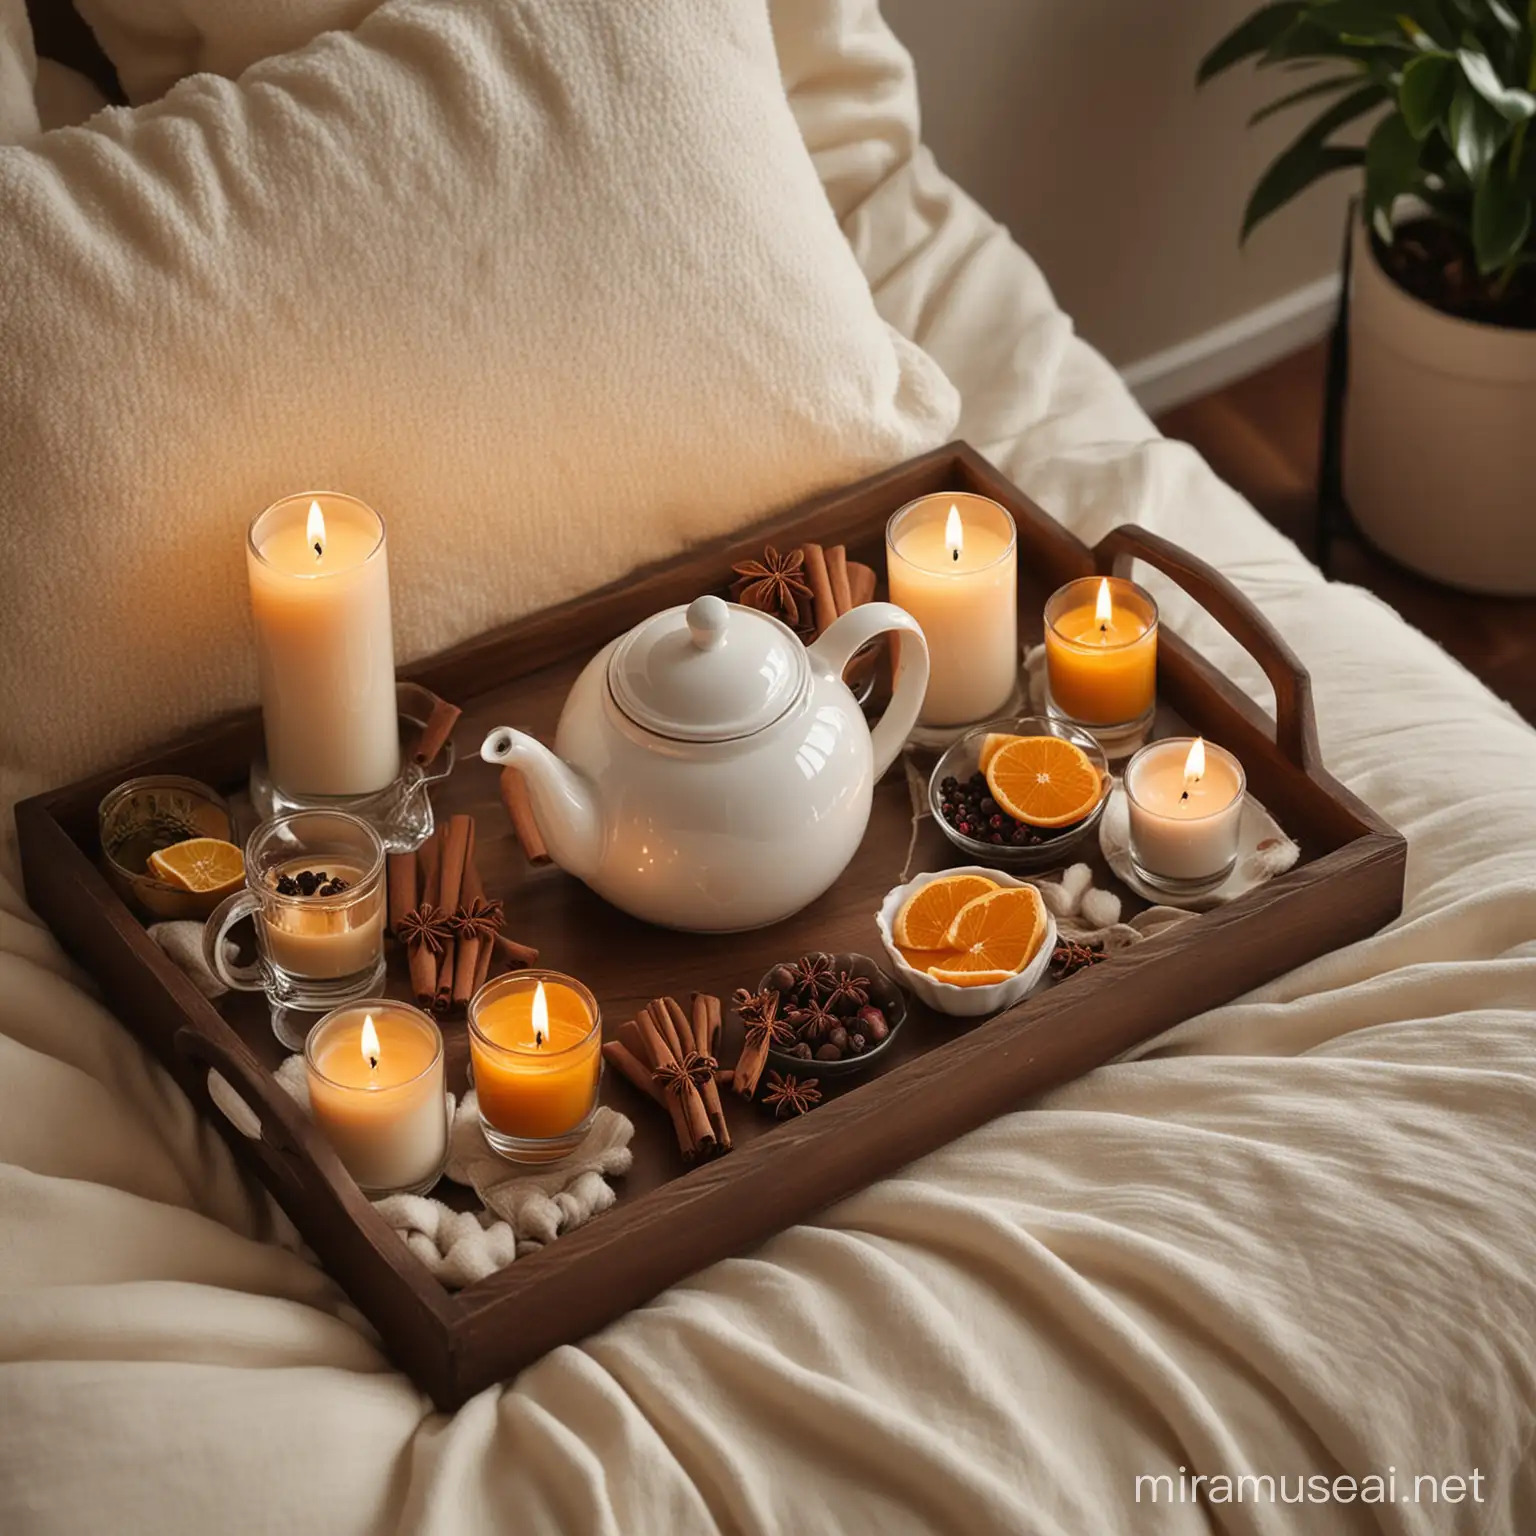 Set up a cozy relaxation scene with a comfortable chair surrounded by plush cushions and flickering candles. Place a tray with a teapot, teacup, and a selection of citrus fruits and spices within reach, inviting viewers to unwind and indulge in the soothing aroma of the national drink.